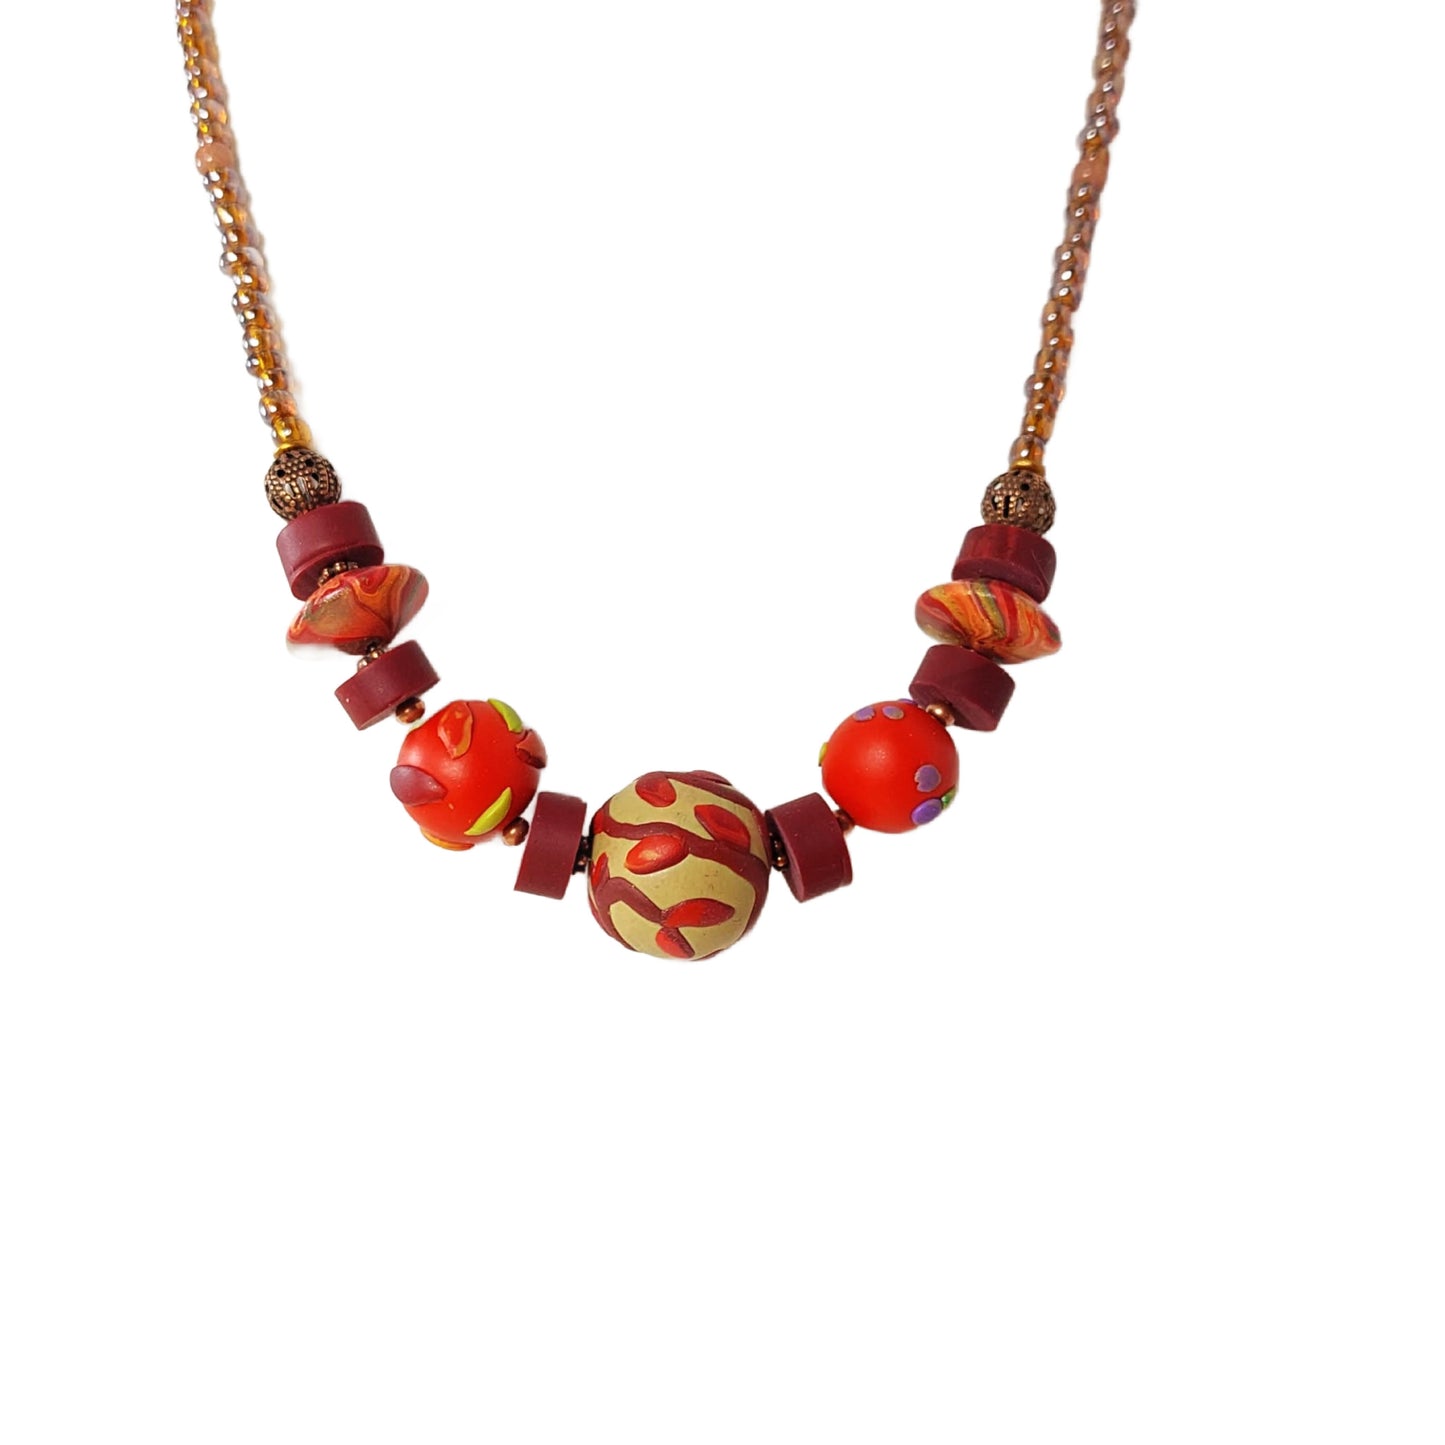 Women's beaded necklace in fall colors with leaf, vine and berry design. One-of-a-kind design adds elegance to your outfit. Lightweight and comfortable to wear. Free shipping in the US.